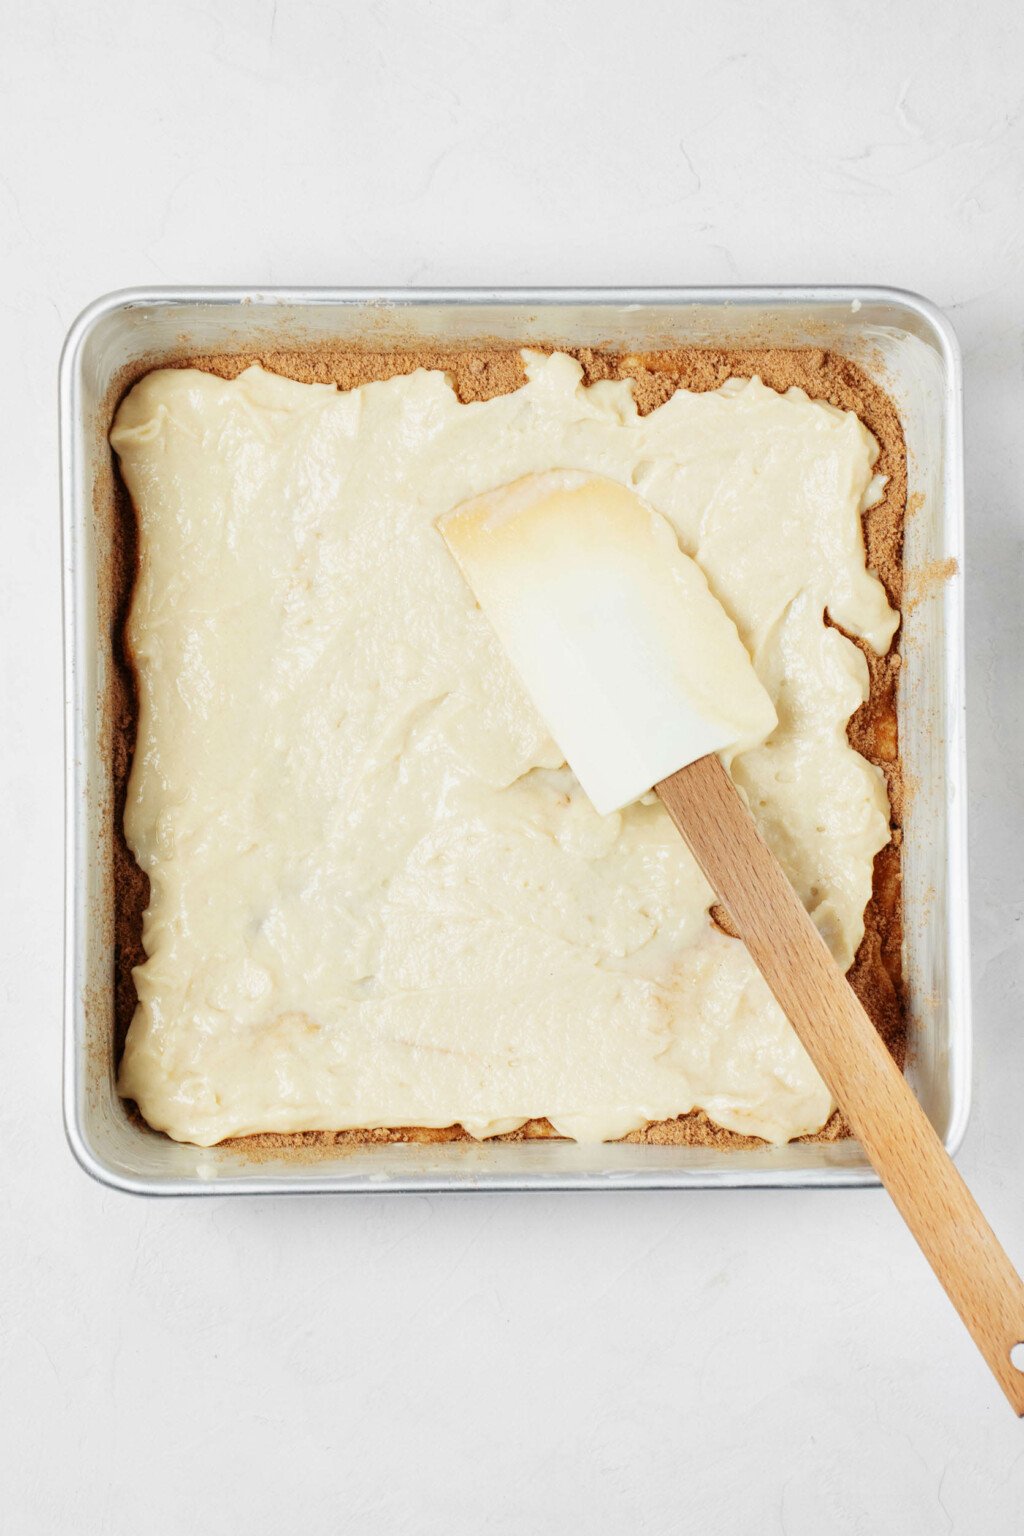 A spatula is being used to spread cake batter over a layer of cinnamon sugar in a square baking dish.